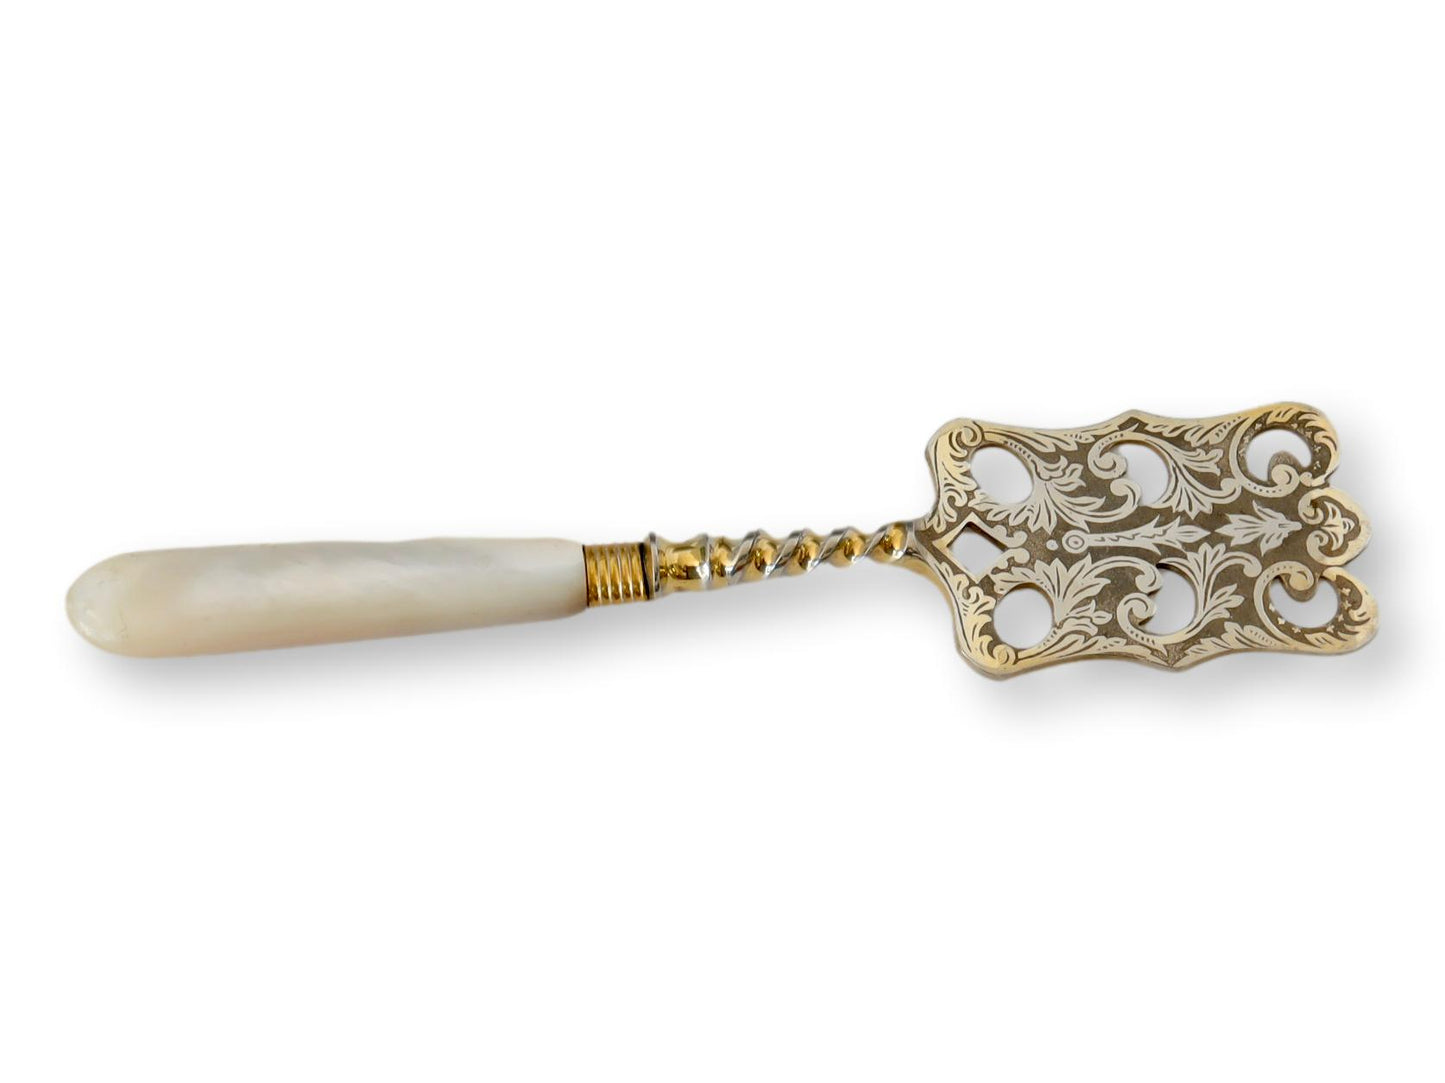 Antique English Mother-of-Pearl Handle Petit Four Server, C. 1900